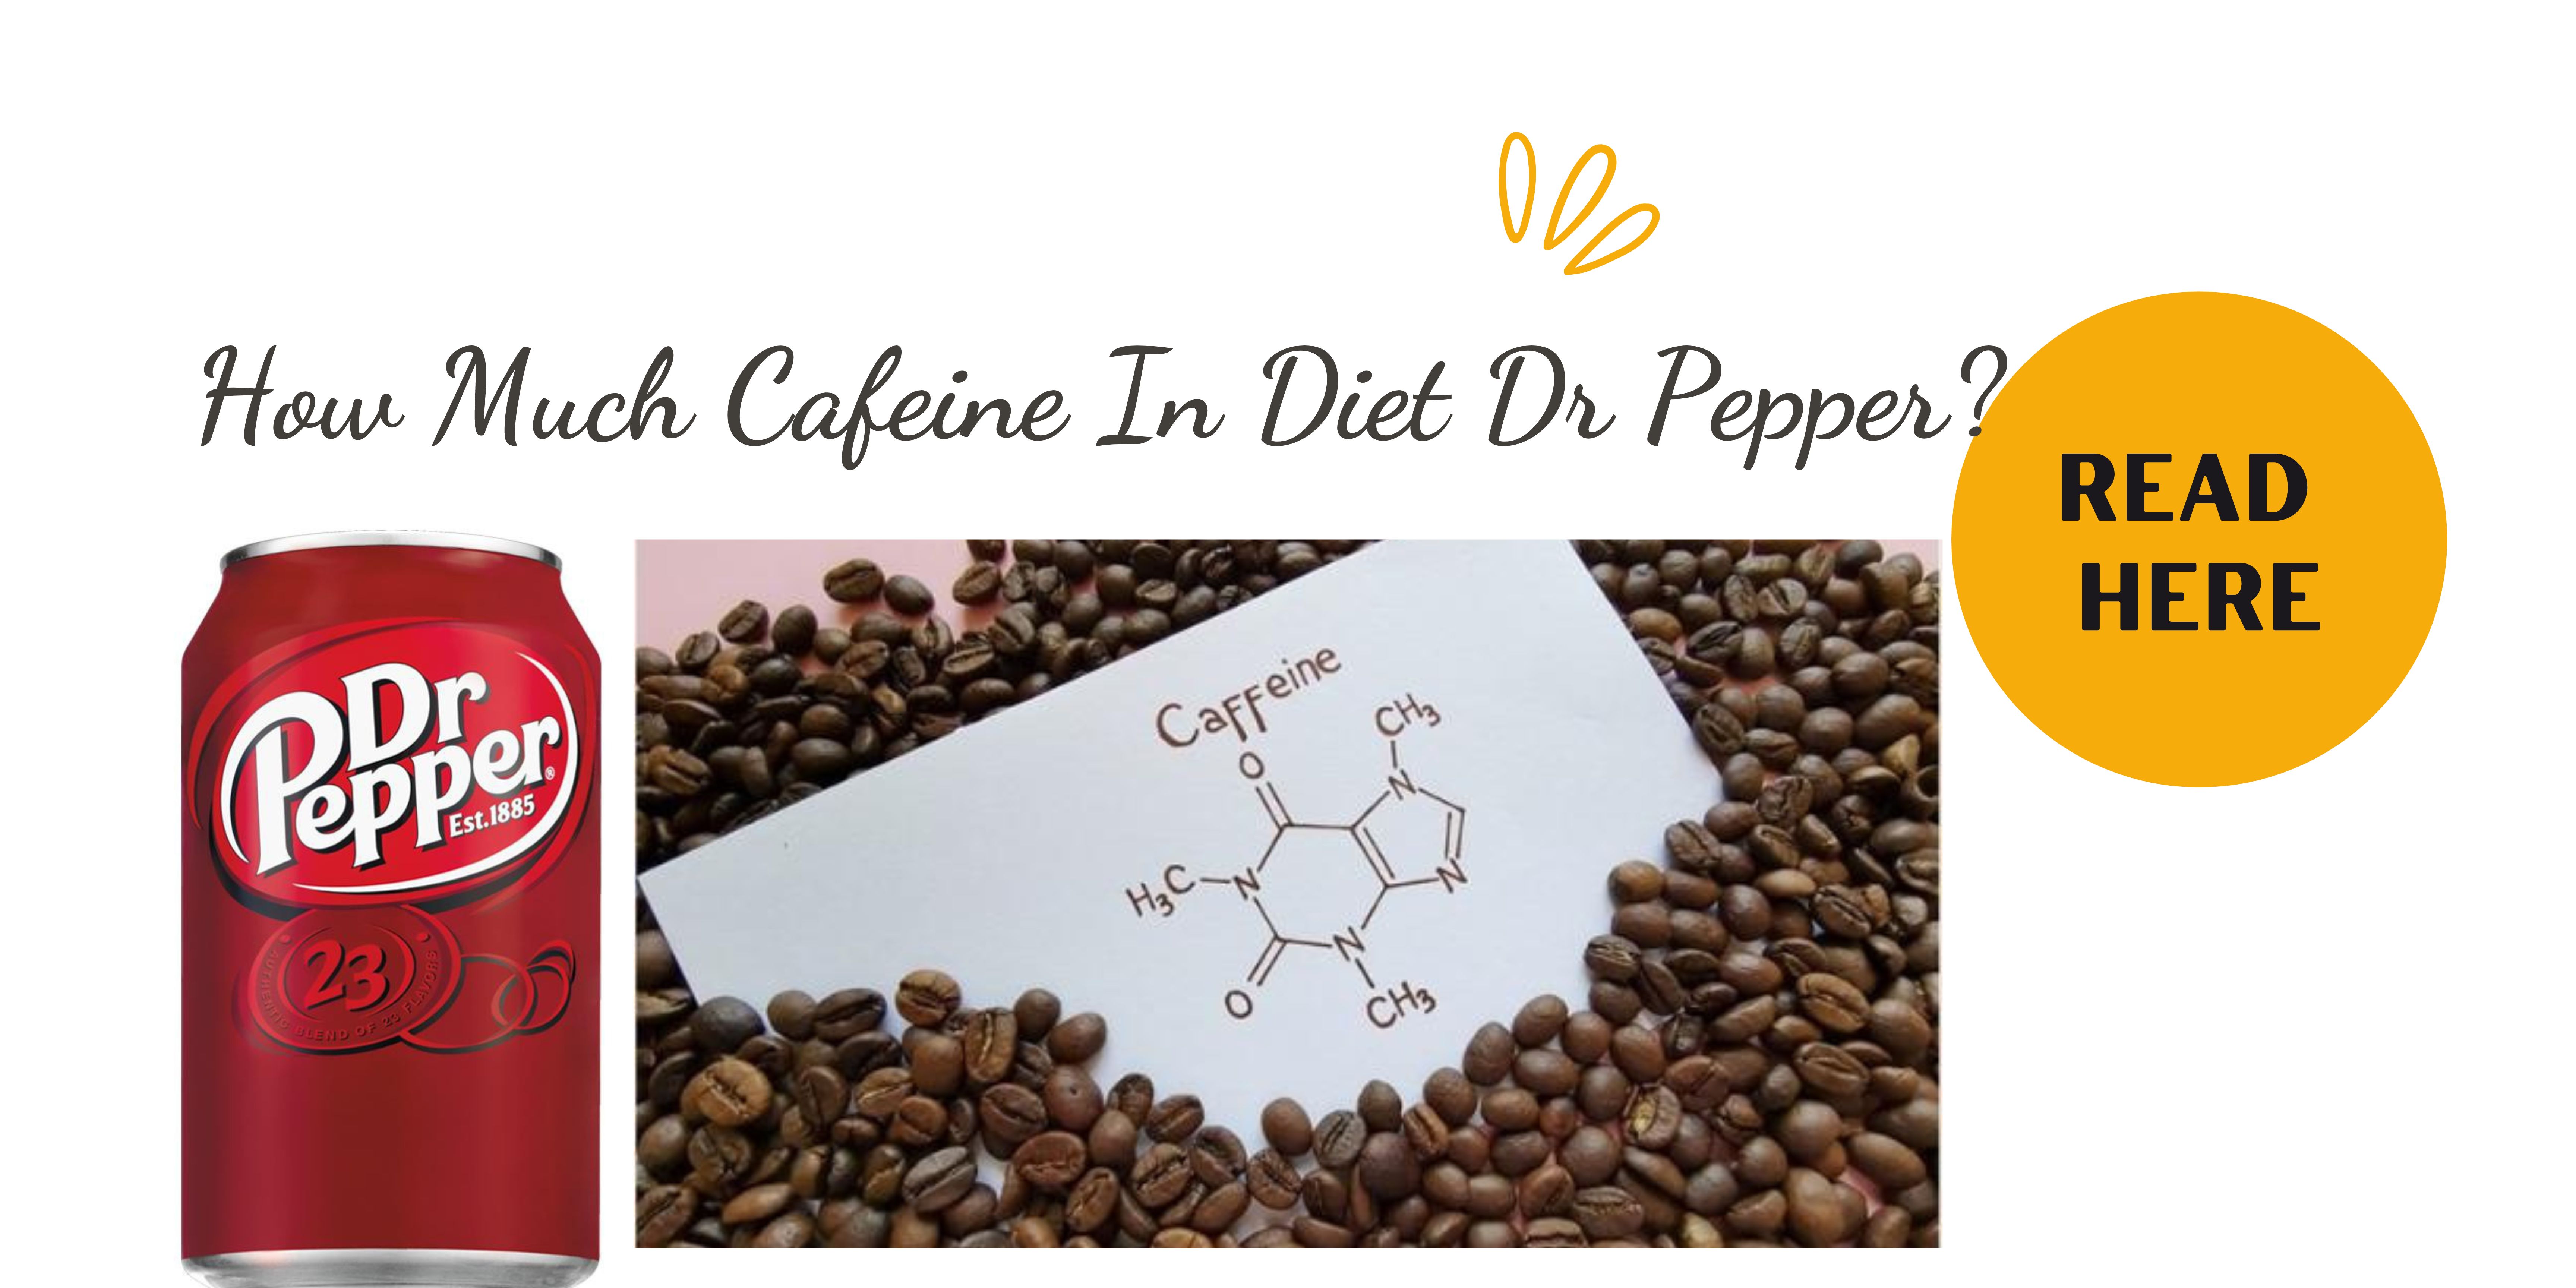 Amount Of Caffeine In Diet Dr Pepper - Is Dr Pepper Bad for Your Health?